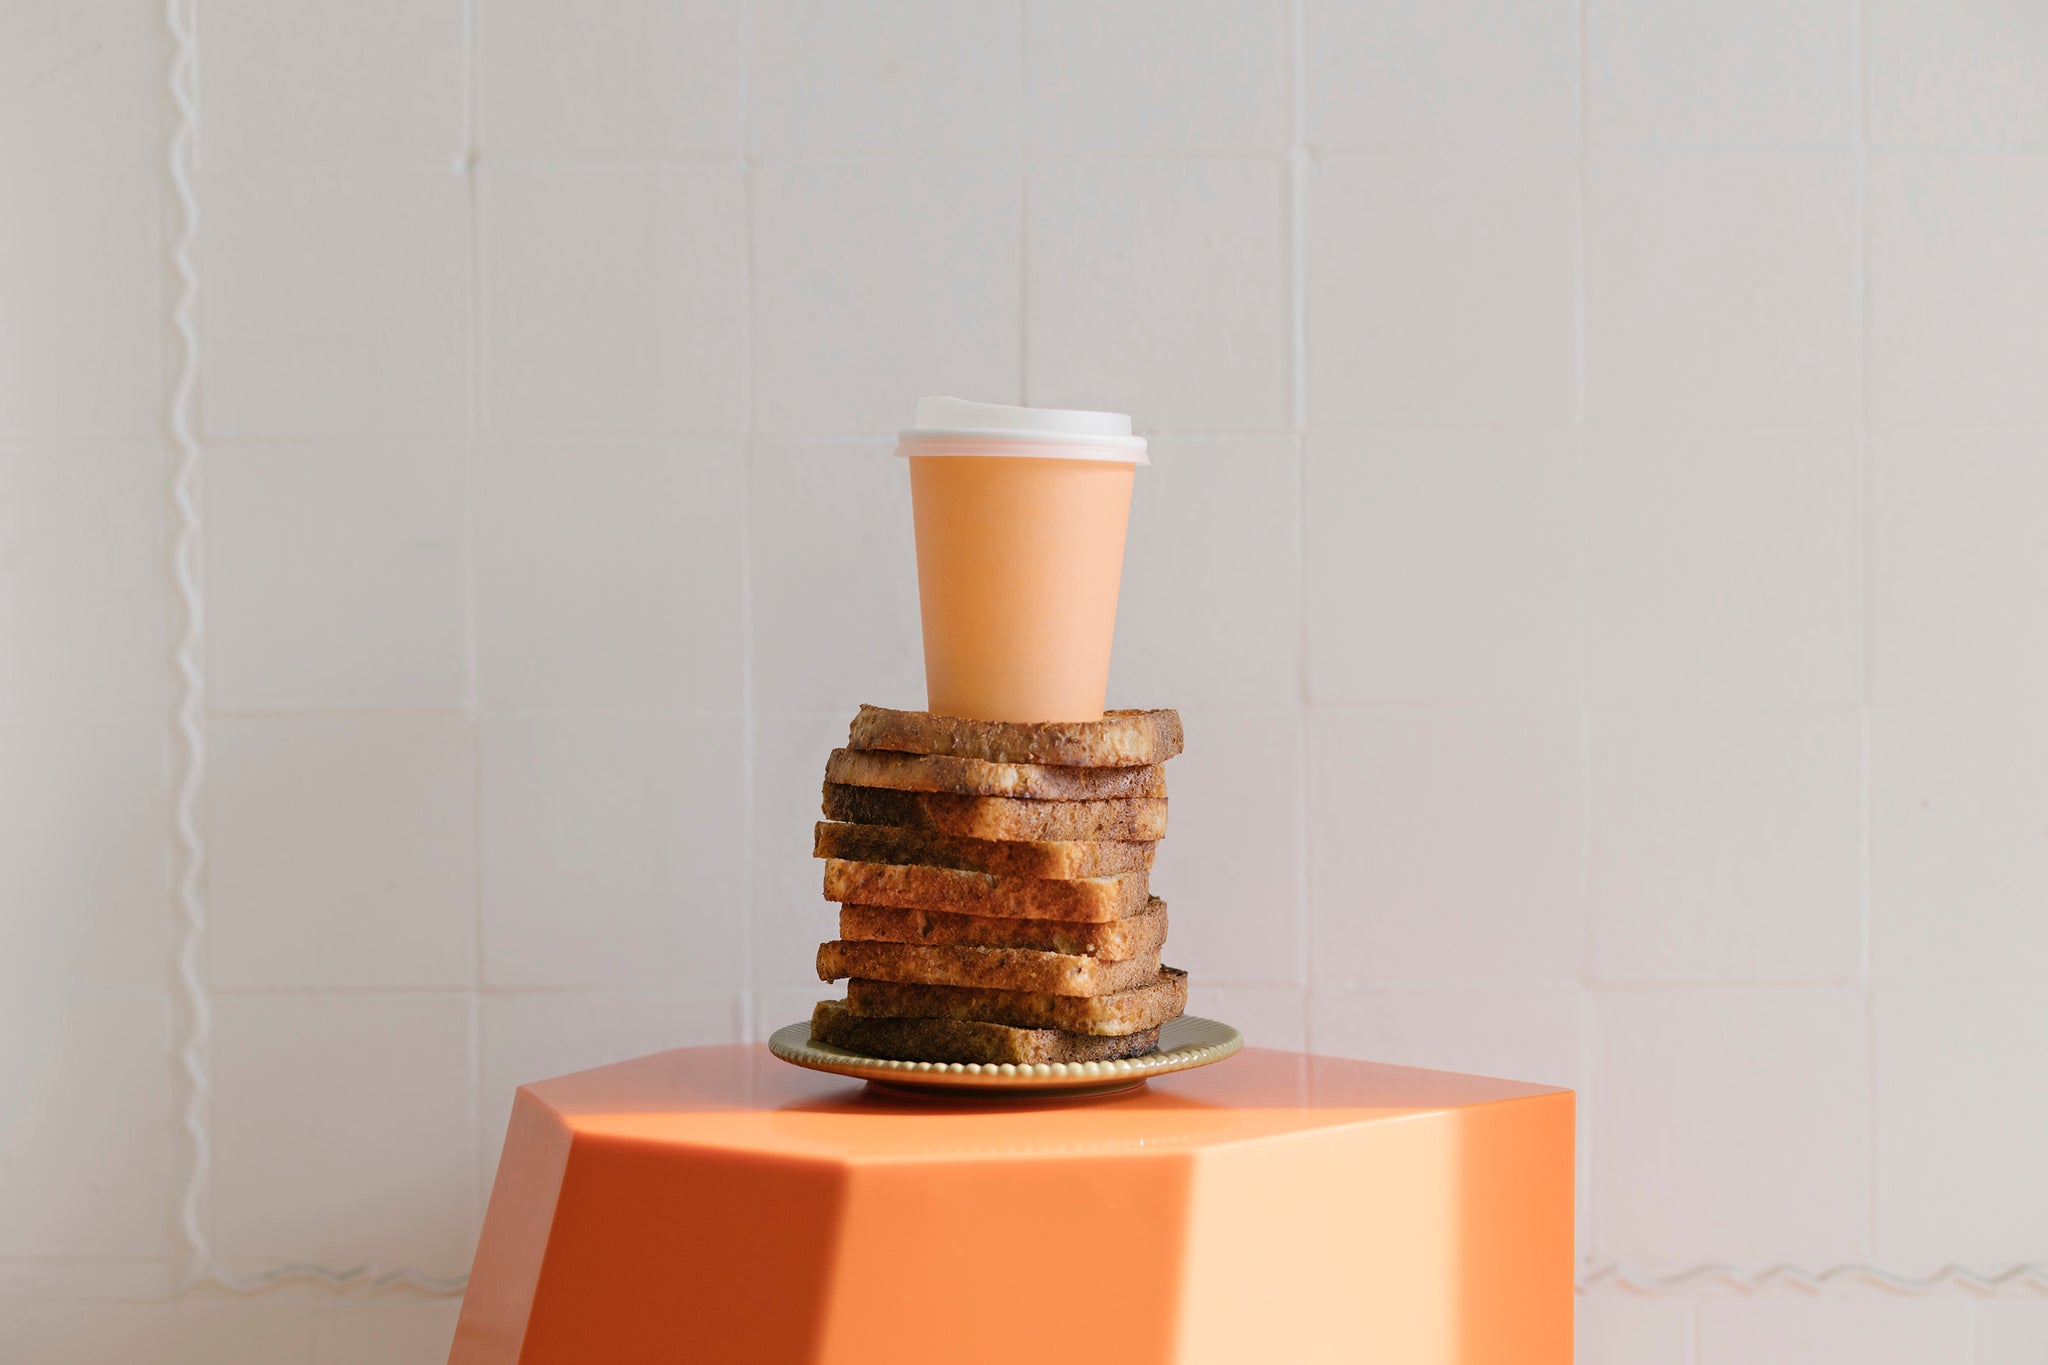 Landscape image of a orange hexagon shaped stool with a soft pink plate sitting in the middle. 12 pieces of wholemeal bread stacked on top, with an orange disposable cup placed on top. 